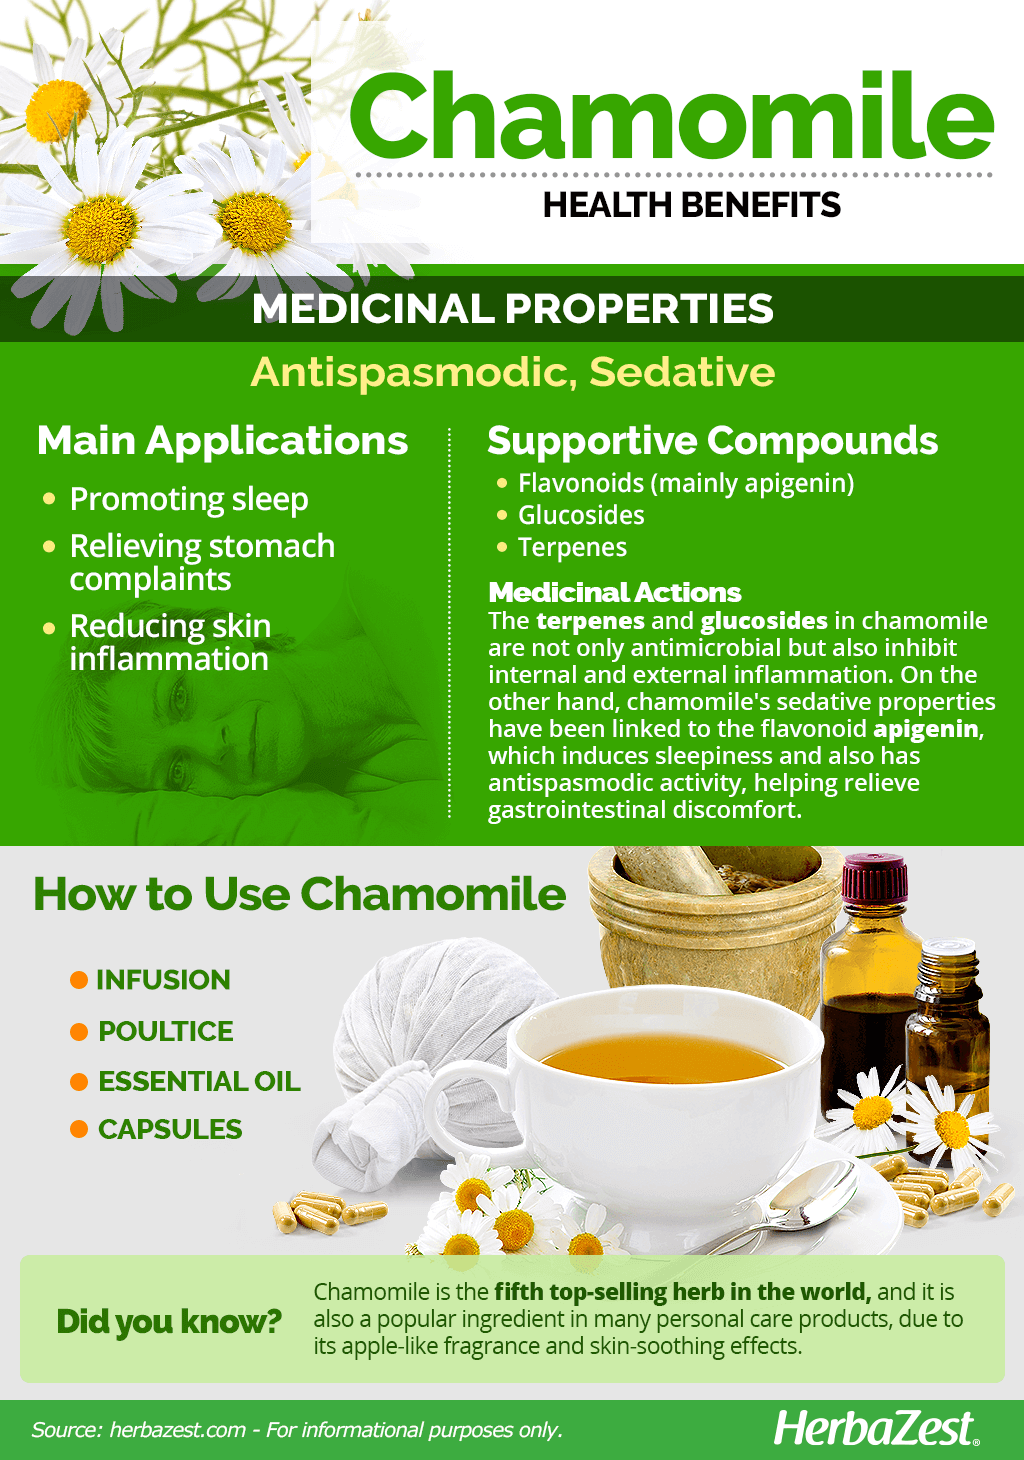 All About Chamomile